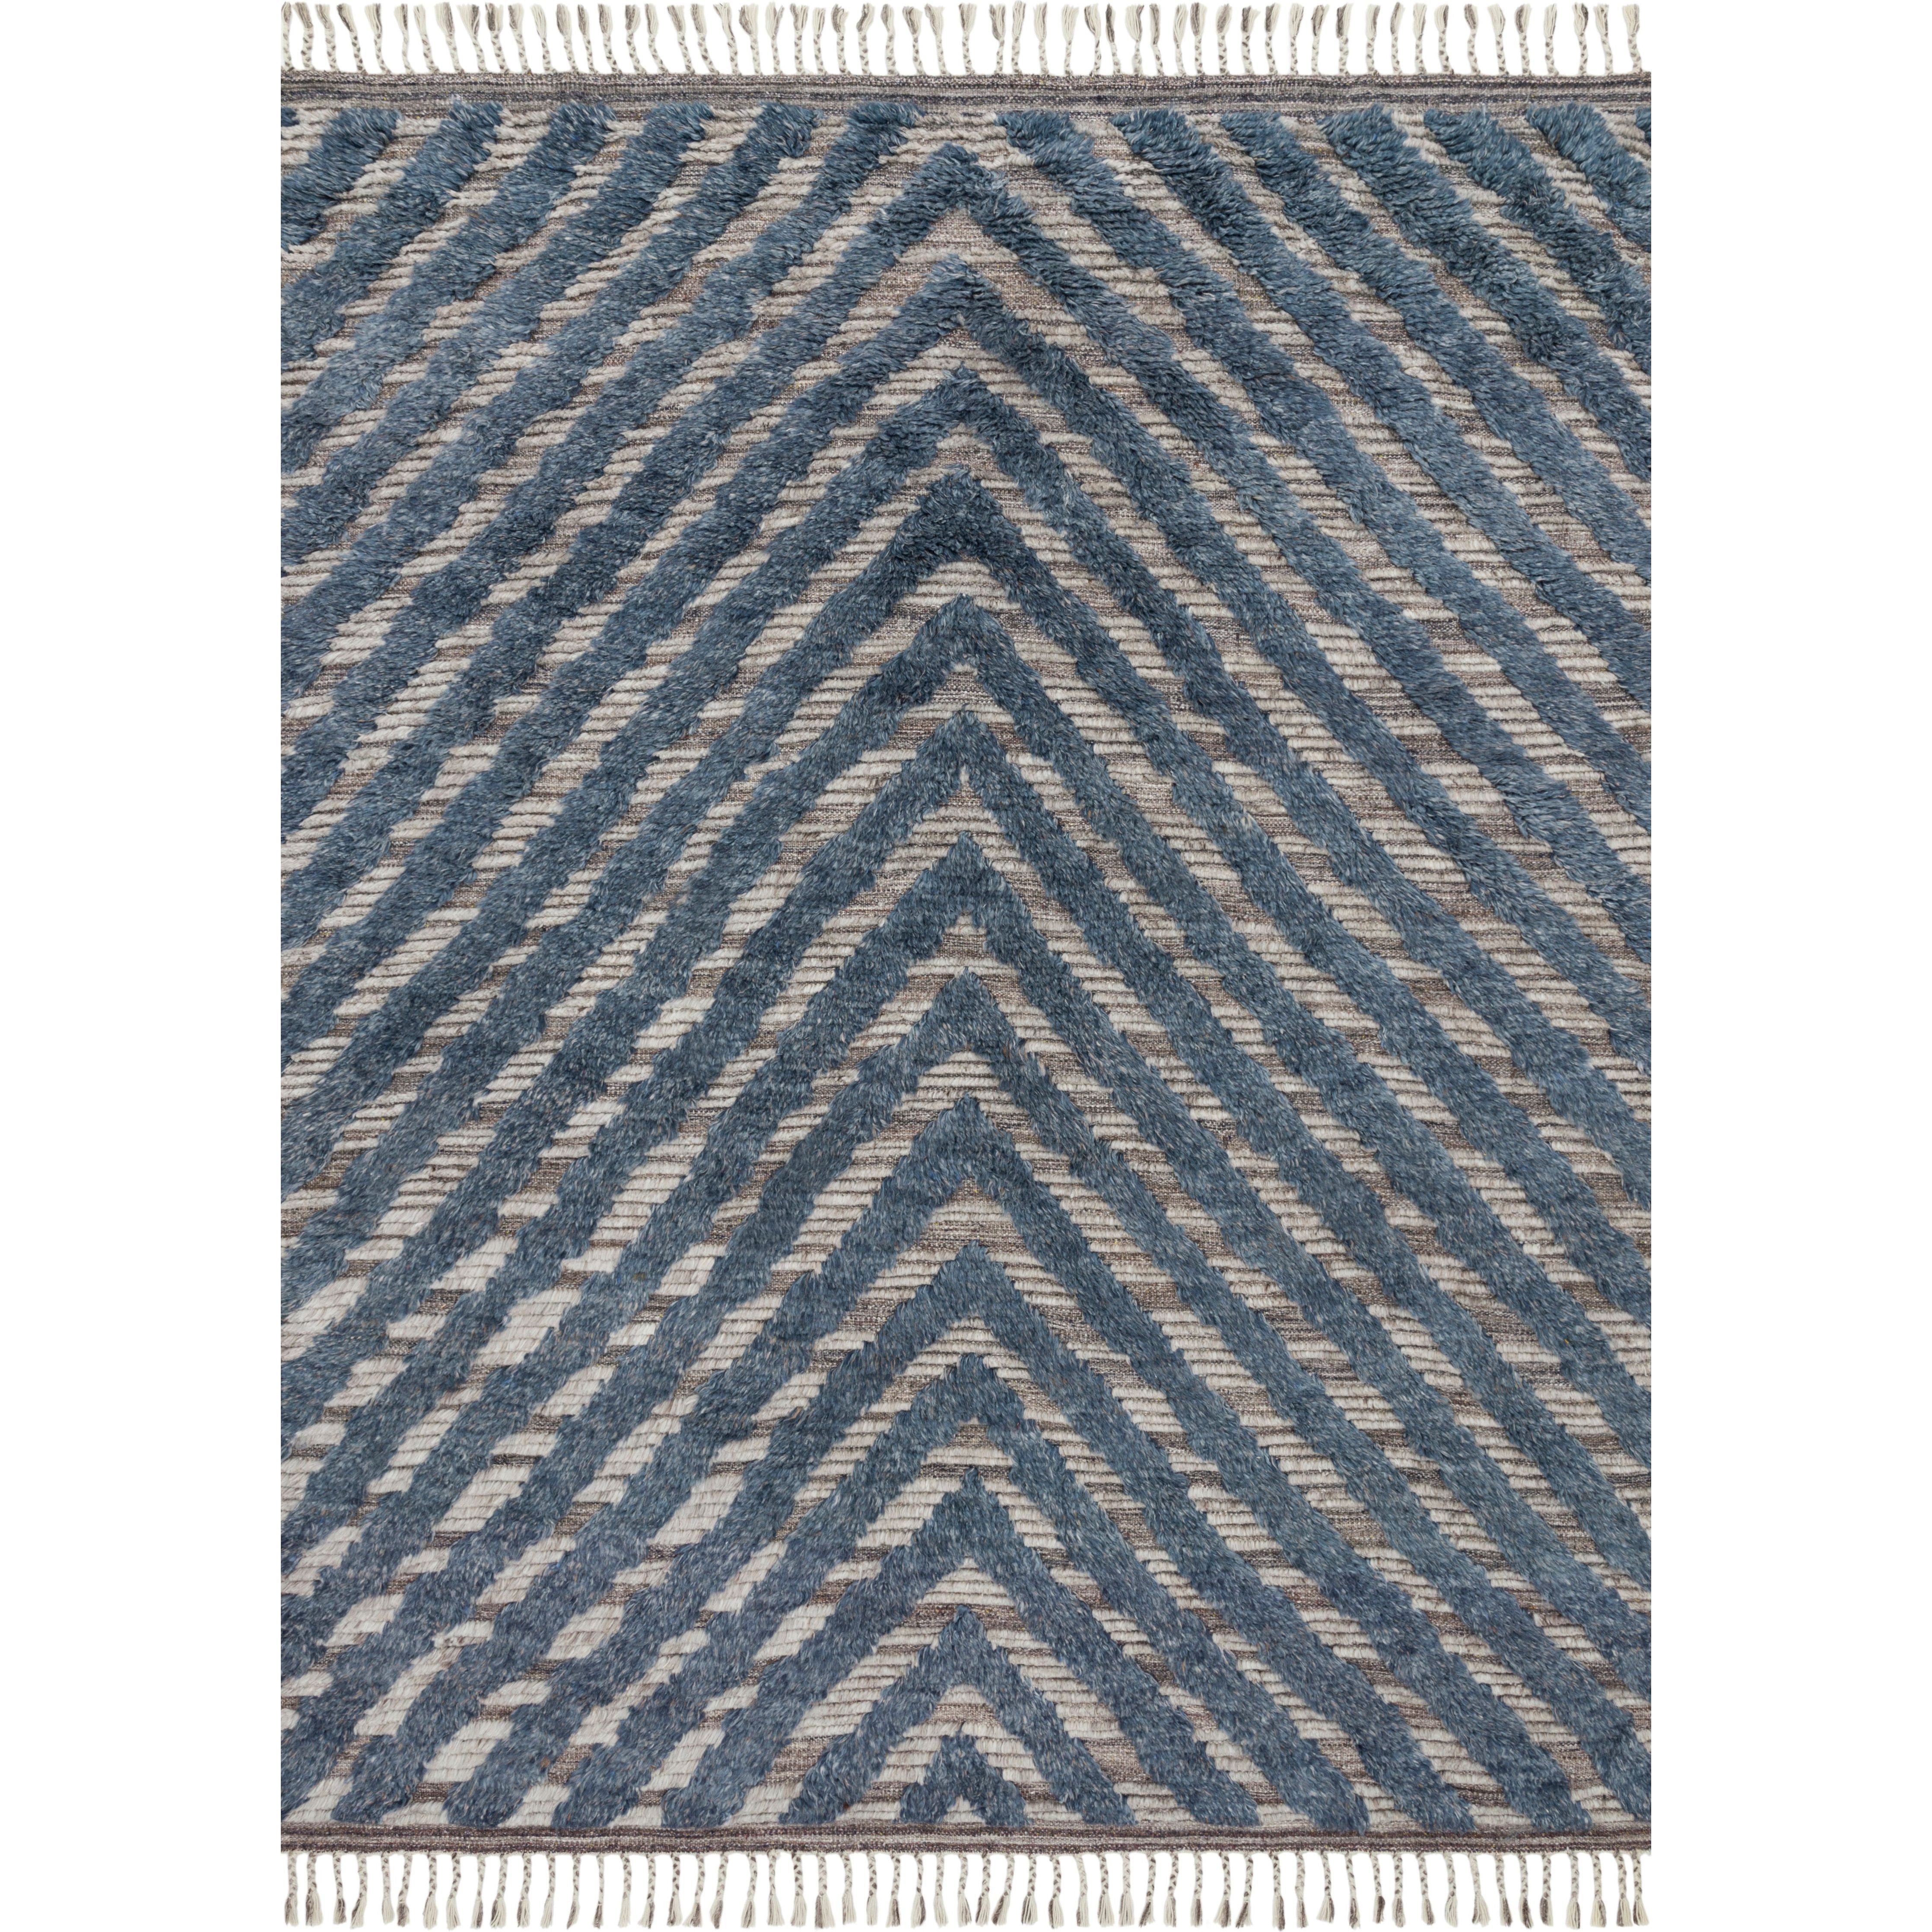 Khalid Blue/Pewter Rug - Amethyst Home A nod to timeless Moroccan style, the Khalid Collection is hand-knotted in India by skilled artisans. The soft pile features 100% natural, undyed wool, lending slight variations in tones that make each piece it's own. Plus, each rug is finished with a thoughtfully designed fringe.